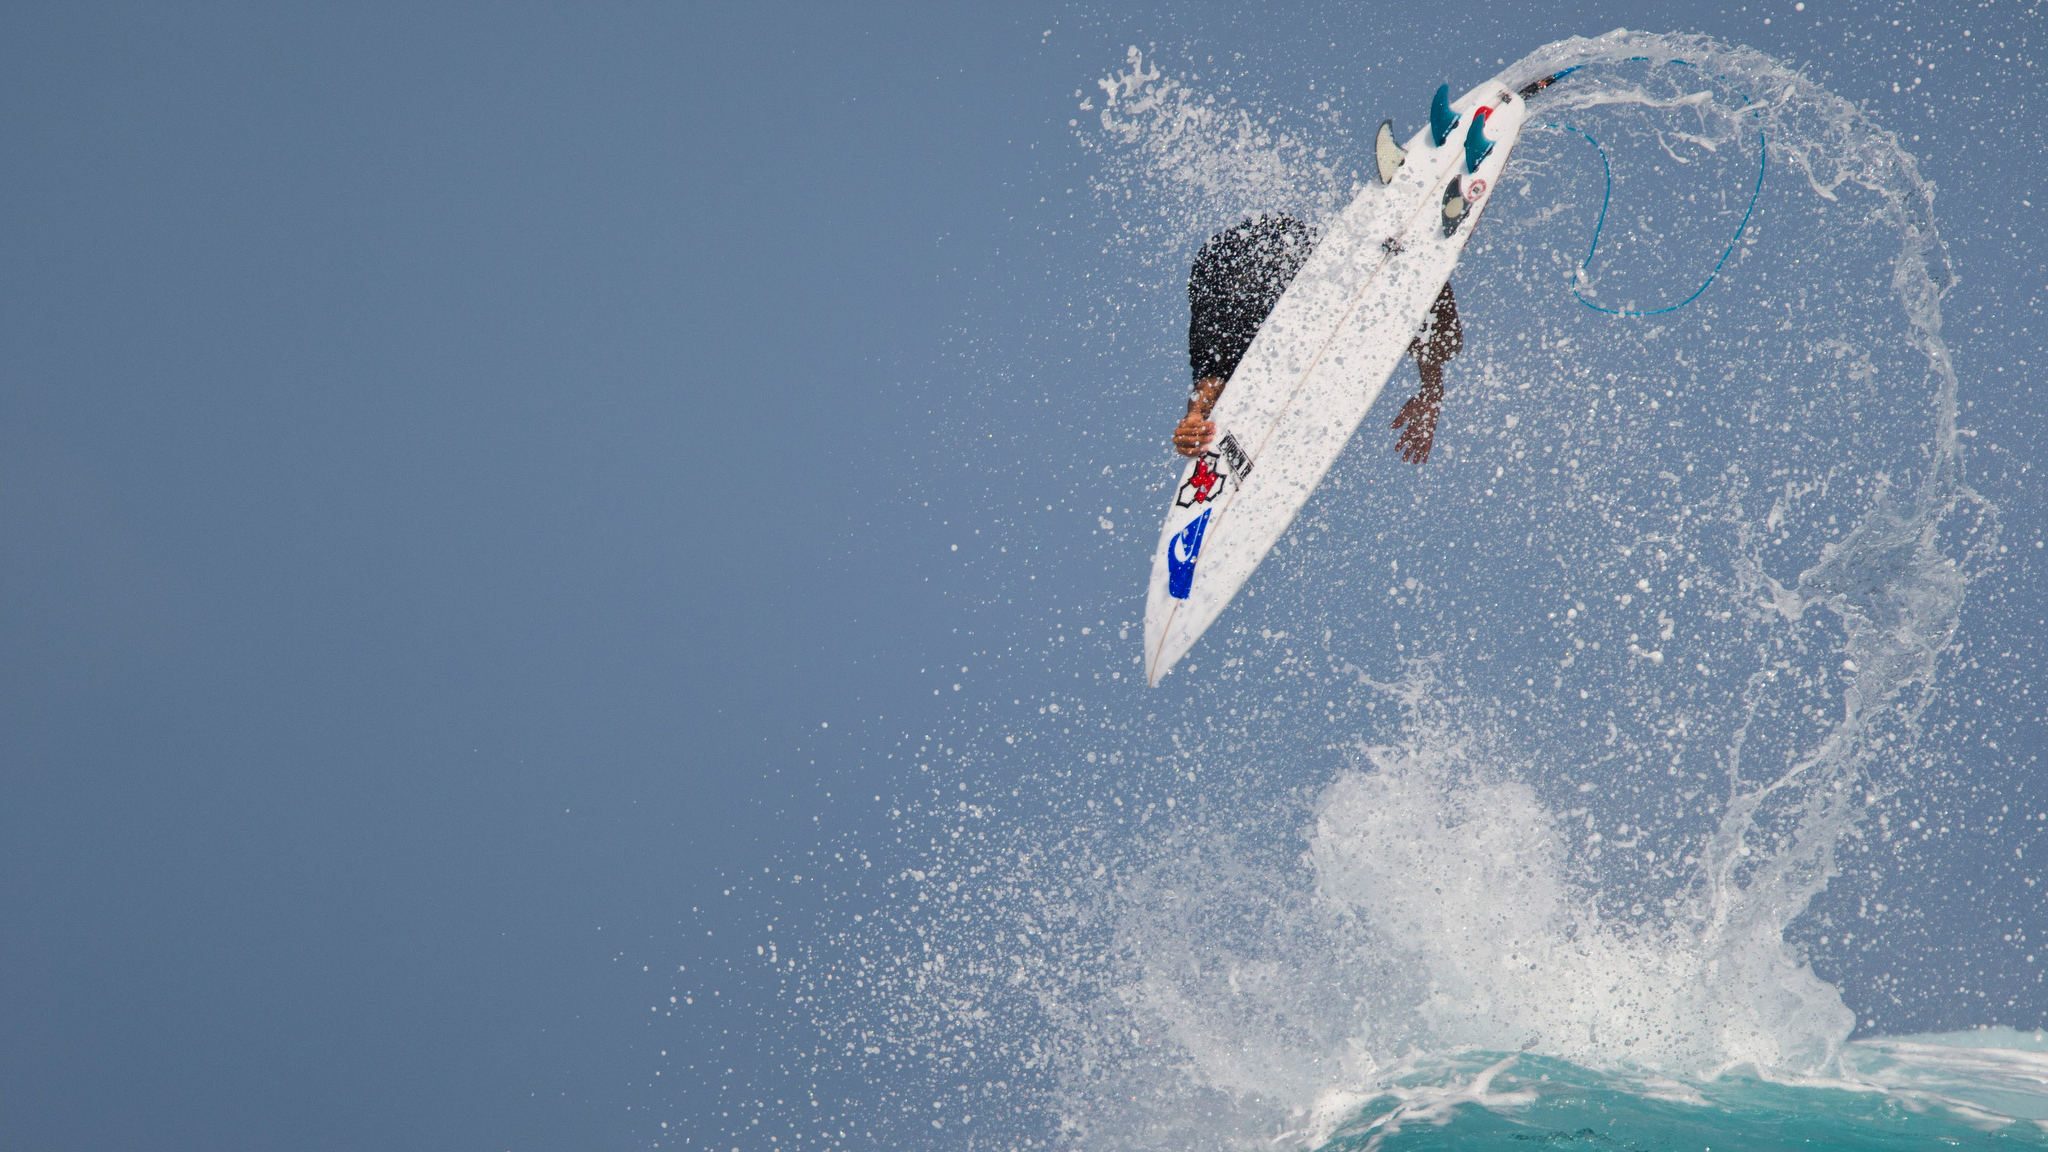 11-time ASP World Champion Kelly Slater will headline Real Surf coming to X Games this April.